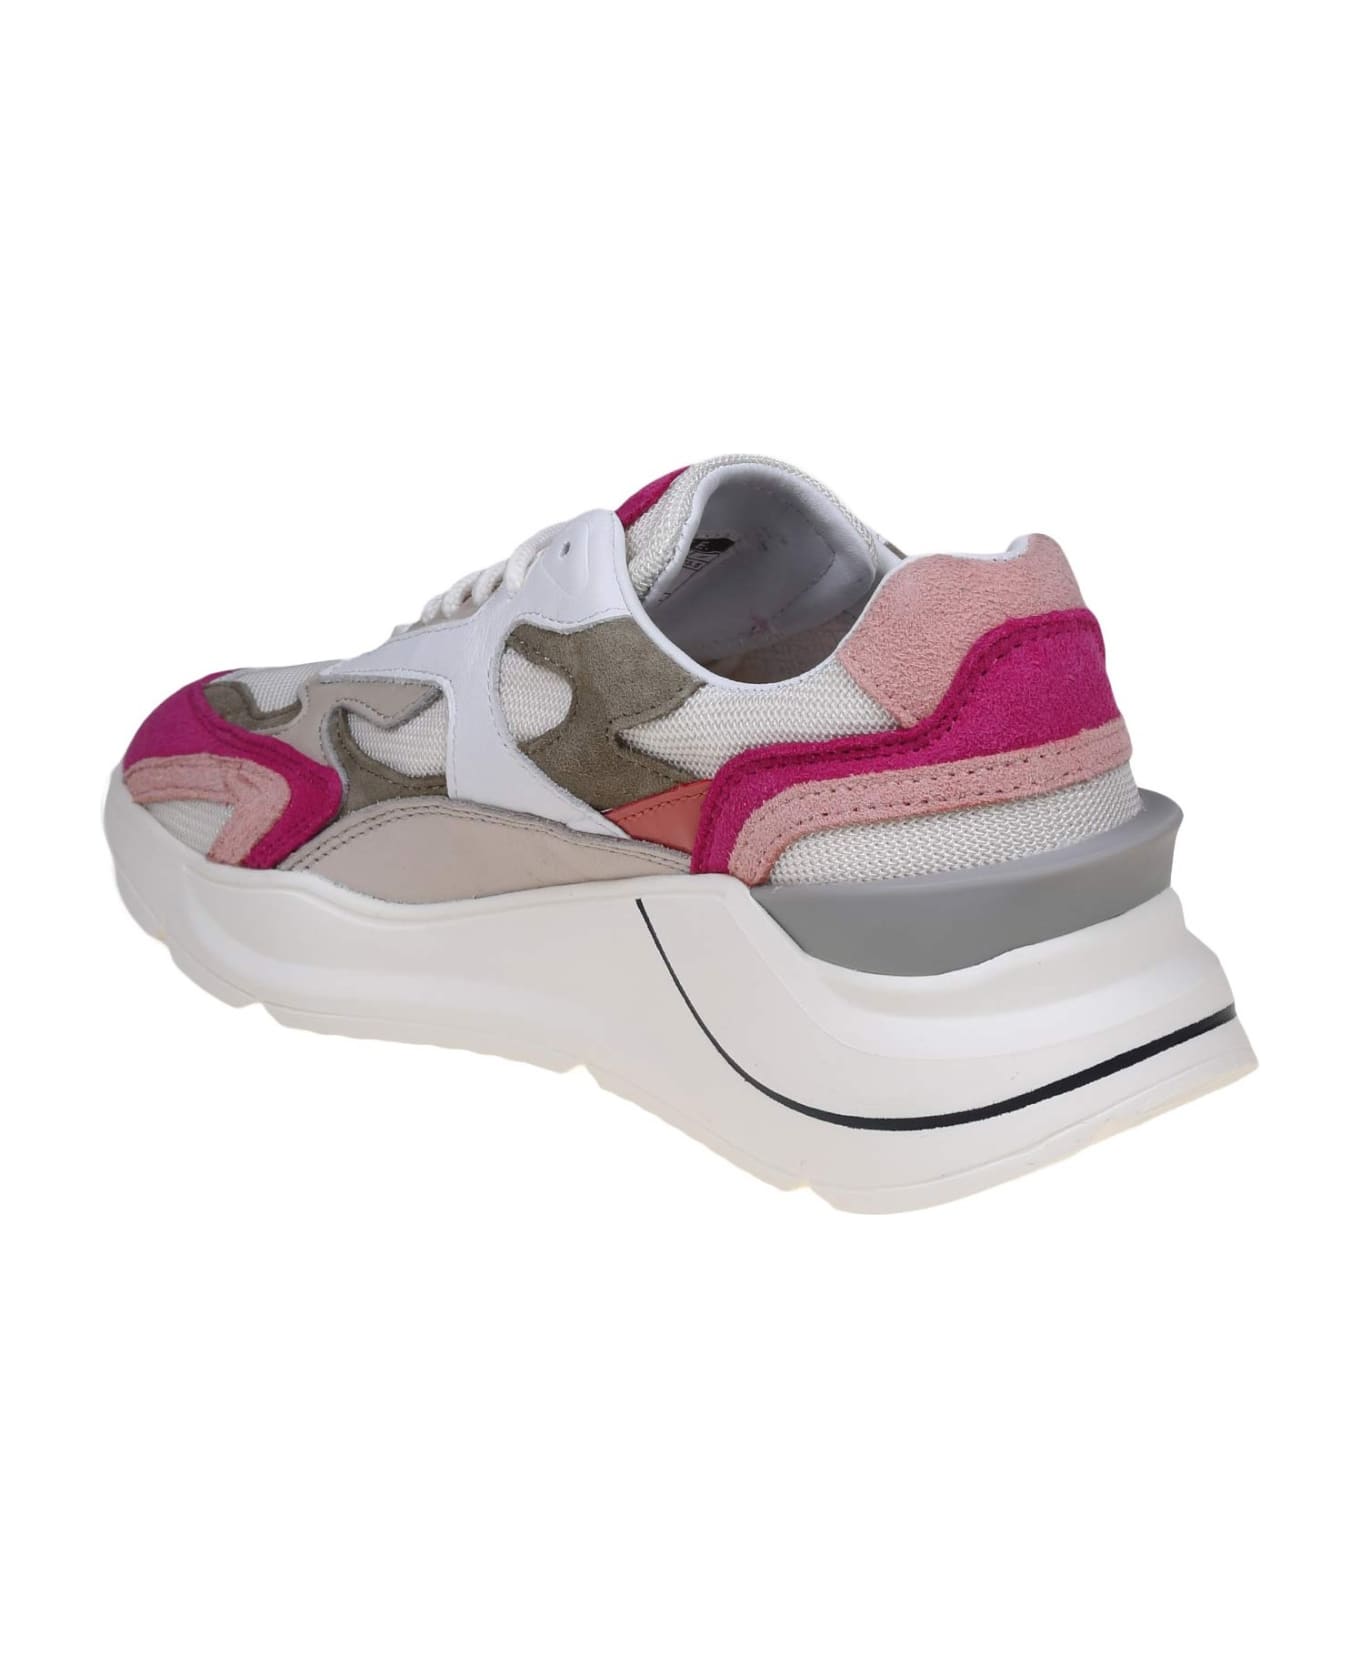 D.A.T.E. Fuga Sneakers In White/fuchsia Leather And Suede - White/Fuxia